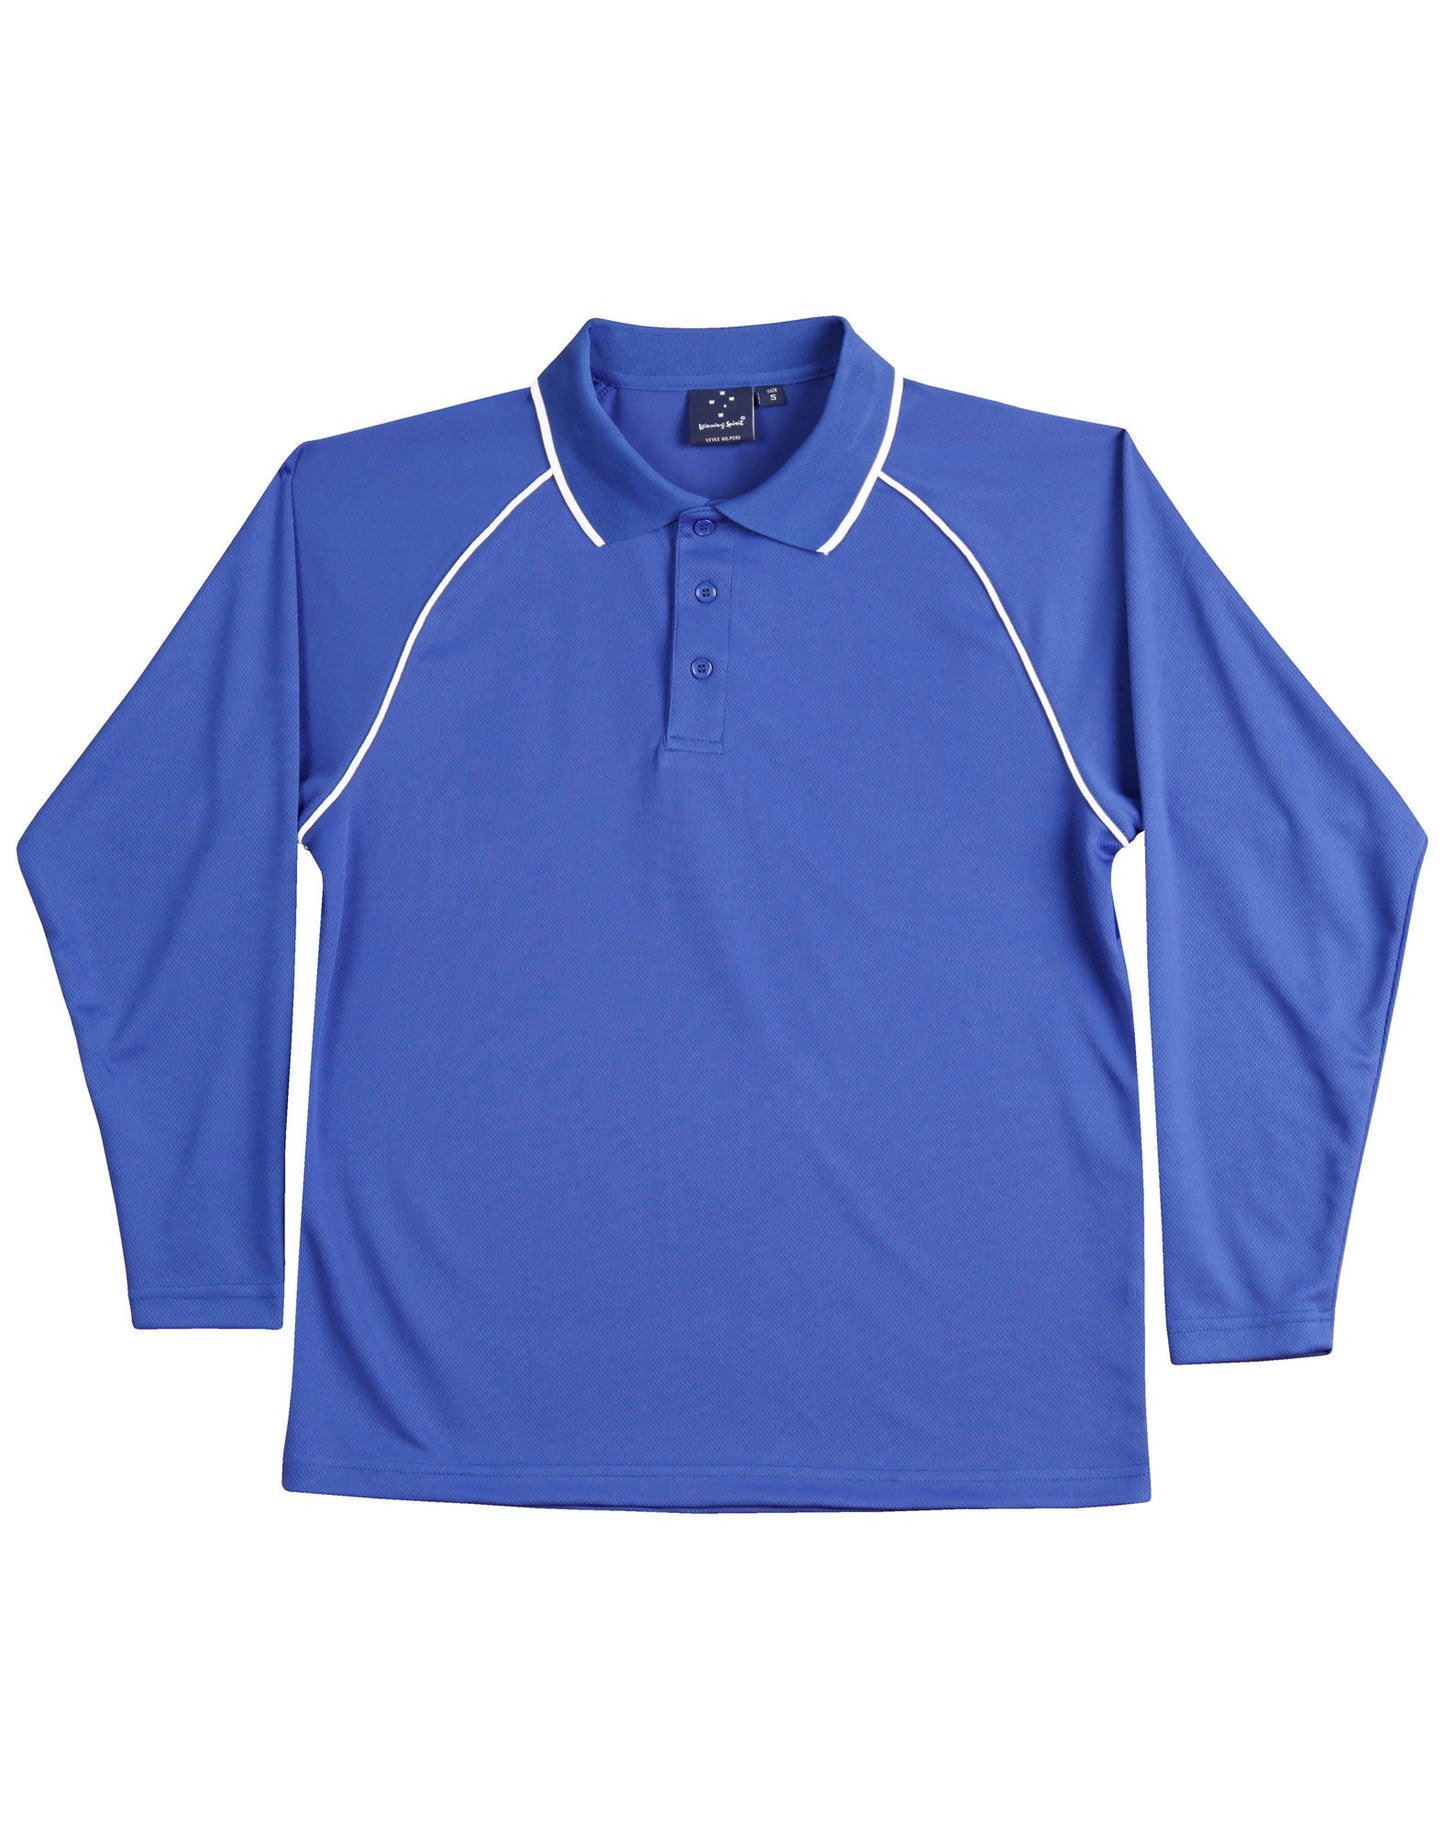 Men's Cooldry Long Sleeve Contrast Polo - PS43